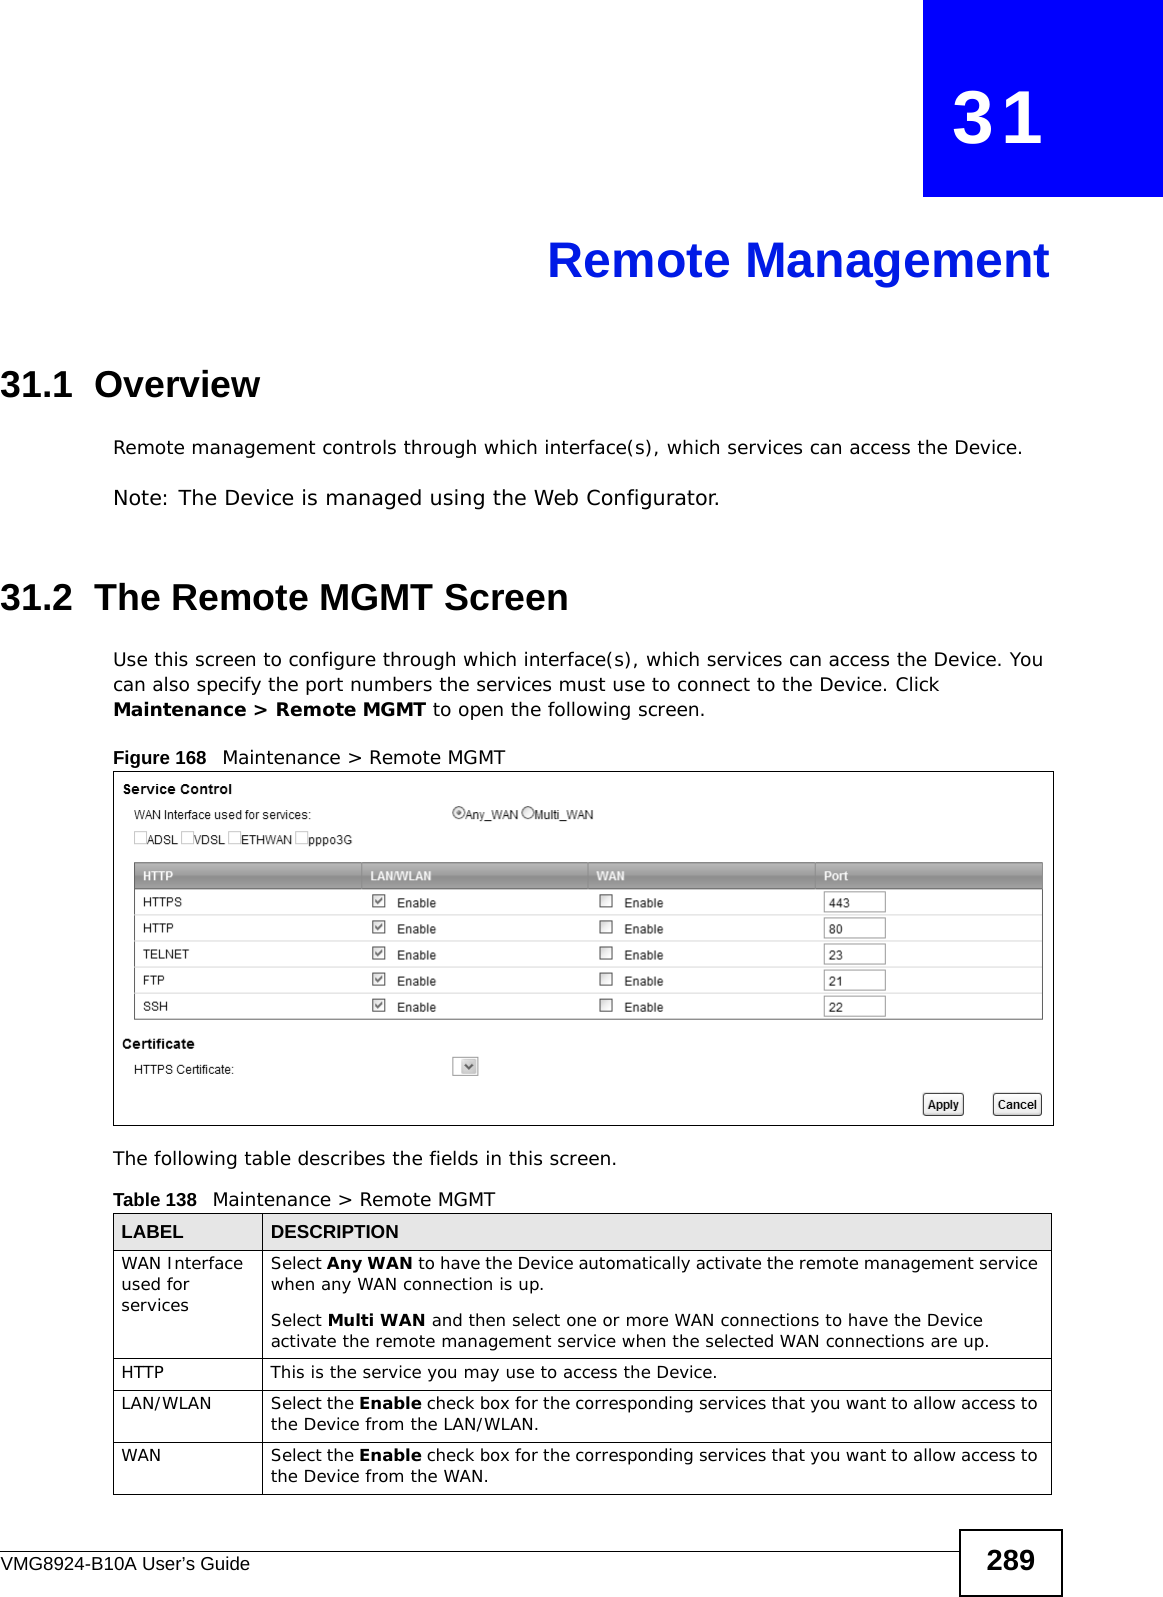 VMG8924-B10A User’s Guide 289CHAPTER   31Remote Management31.1  OverviewRemote management controls through which interface(s), which services can access the Device. Note: The Device is managed using the Web Configurator.31.2  The Remote MGMT ScreenUse this screen to configure through which interface(s), which services can access the Device. You can also specify the port numbers the services must use to connect to the Device. Click Maintenance &gt; Remote MGMT to open the following screen. Figure 168   Maintenance &gt; Remote MGMT The following table describes the fields in this screen. Table 138   Maintenance &gt; Remote MGMT LABEL DESCRIPTIONWAN Interface used for servicesSelect Any WAN to have the Device automatically activate the remote management service when any WAN connection is up.Select Multi WAN and then select one or more WAN connections to have the Device activate the remote management service when the selected WAN connections are up.HTTP This is the service you may use to access the Device.LAN/WLAN Select the Enable check box for the corresponding services that you want to allow access to the Device from the LAN/WLAN.WAN Select the Enable check box for the corresponding services that you want to allow access to the Device from the WAN.